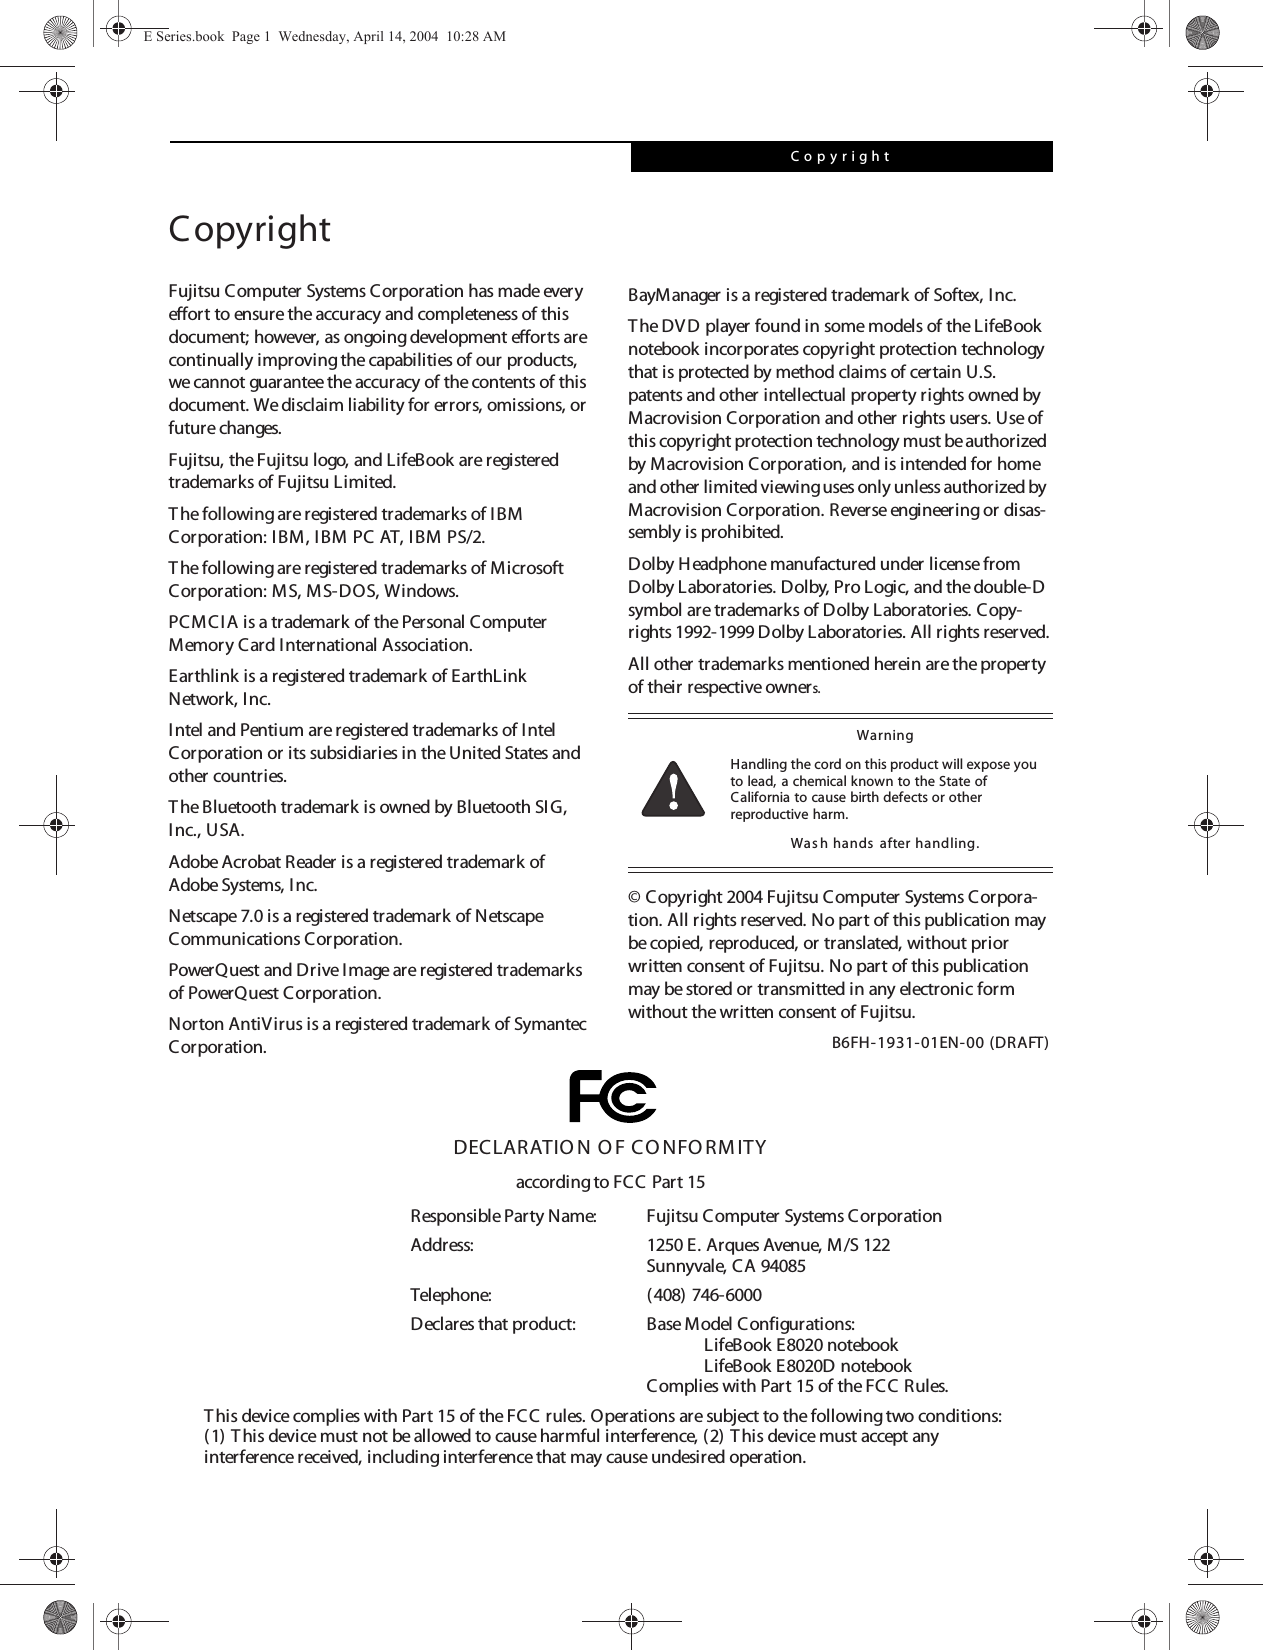 CopyrightCopyrightFujitsu Computer Systems Corporation has made every effort to ensure the accuracy and completeness of this document; however, as ongoing development efforts are continually improving the capabilities of our products, we cannot guarantee the accuracy of the contents of this document. We disclaim liability for errors, omissions, or future changes.Fujitsu, the Fujitsu logo, and LifeBook are registered trademarks of Fujitsu Limited.The following are registered trademarks of IBM Corporation: IBM, IBM PC AT, IBM PS/2. The following are registered trademarks of Microsoft Corporation: MS, MS-DOS, Windows.PCMCIA is a trademark of the Personal Computer Memory Card International Association.Earthlink is a registered trademark of EarthLink Network, Inc. Intel and Pentium are registered trademarks of Intel Corporation or its subsidiaries in the United States and other countries.The Bluetooth trademark is owned by Bluetooth SIG, Inc., USA.Adobe Acrobat Reader is a registered trademark of Adobe Systems, Inc.Netscape 7.0 is a registered trademark of Netscape Communications Corporation.PowerQuest and Drive Image are registered trademarks of PowerQuest Corporation.Norton AntiVirus is a registered trademark of Symantec Corporation.BayManager is a registered trademark of Softex, Inc.The DVD player found in some models of the LifeBook notebook incorporates copyright protection technology that is protected by method claims of certain U.S. patents and other intellectual property rights owned by Macrovision Corporation and other rights users. Use of this copyright protection technology must be authorized by Macrovision Corporation, and is intended for home and other limited viewing uses only unless authorized by Macrovision Corporation. Reverse engineering or disas-sembly is prohibited.Dolby Headphone manufactured under license from Dolby Laboratories. Dolby, Pro Logic, and the double-D symbol are trademarks of Dolby Laboratories. Copy-rights 1992-1999 Dolby Laboratories. All rights reserved.All other trademarks mentioned herein are the property of their respective owners.© Copyright 2004 Fujitsu Computer Systems Corpora-tion. All rights reserved. No part of this publication may be copied, reproduced, or translated, without prior written consent of Fujitsu. No part of this publication may be stored or transmitted in any electronic form without the written consent of Fujitsu.B6FH-1931-01EN-00 (DRAFT)WarningHandling the cord on this product will expose you to lead, a chemical known to the State of California to cause birth defects or other reproductive harm. Was h hands  after handling.DECLARATIO N O F CO NFO RM ITYaccording to FCC Part 15Responsible Party Name: Fujitsu Computer Systems CorporationAddress:  1250 E. Arques Avenue, M/S 122Sunnyvale, CA 94085Telephone: (408) 746-6000Declares that product: Base Model Configurations:LifeBook E8020 notebookLifeBook E8020D notebookComplies with Part 15 of the FCC Rules.This device complies with Part 15 of the FCC rules. Operations are subject to the following two conditions:(1) This device must not be allowed to cause harmful interference, (2) This device must accept anyinterference received, including interference that may cause undesired operation.E Series.book  Page 1  Wednesday, April 14, 2004  10:28 AM